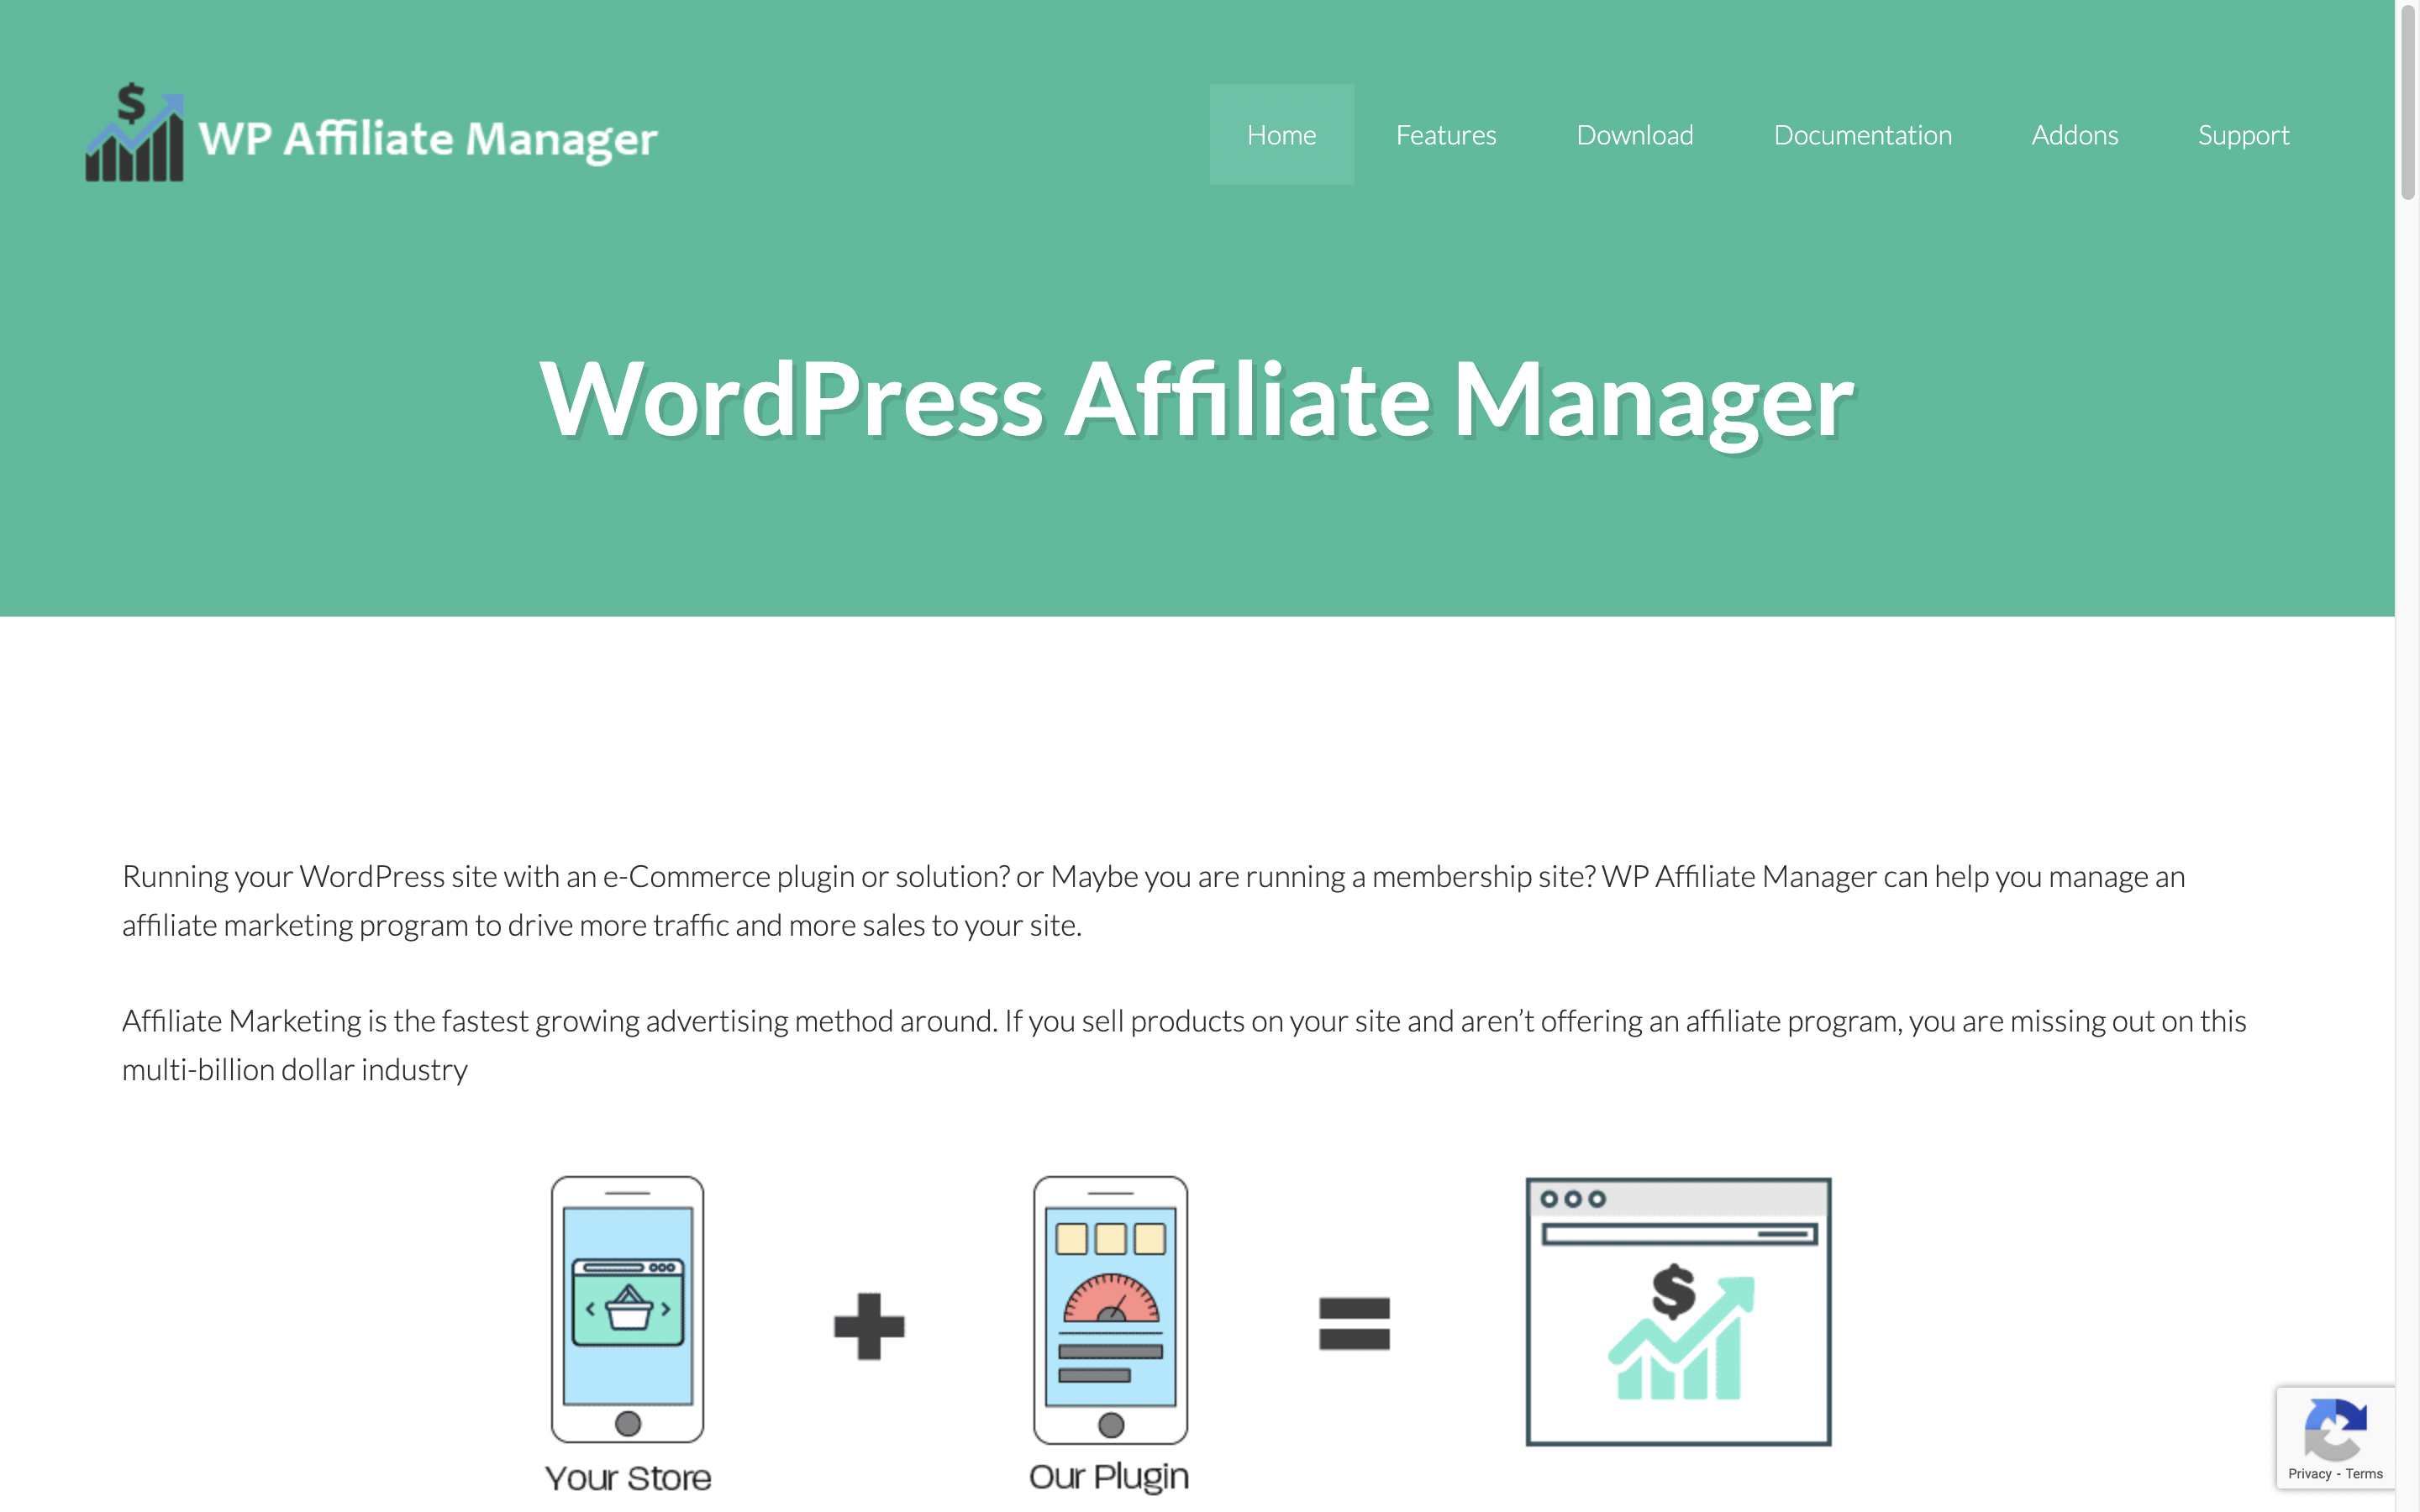 WP Affiliate Manager